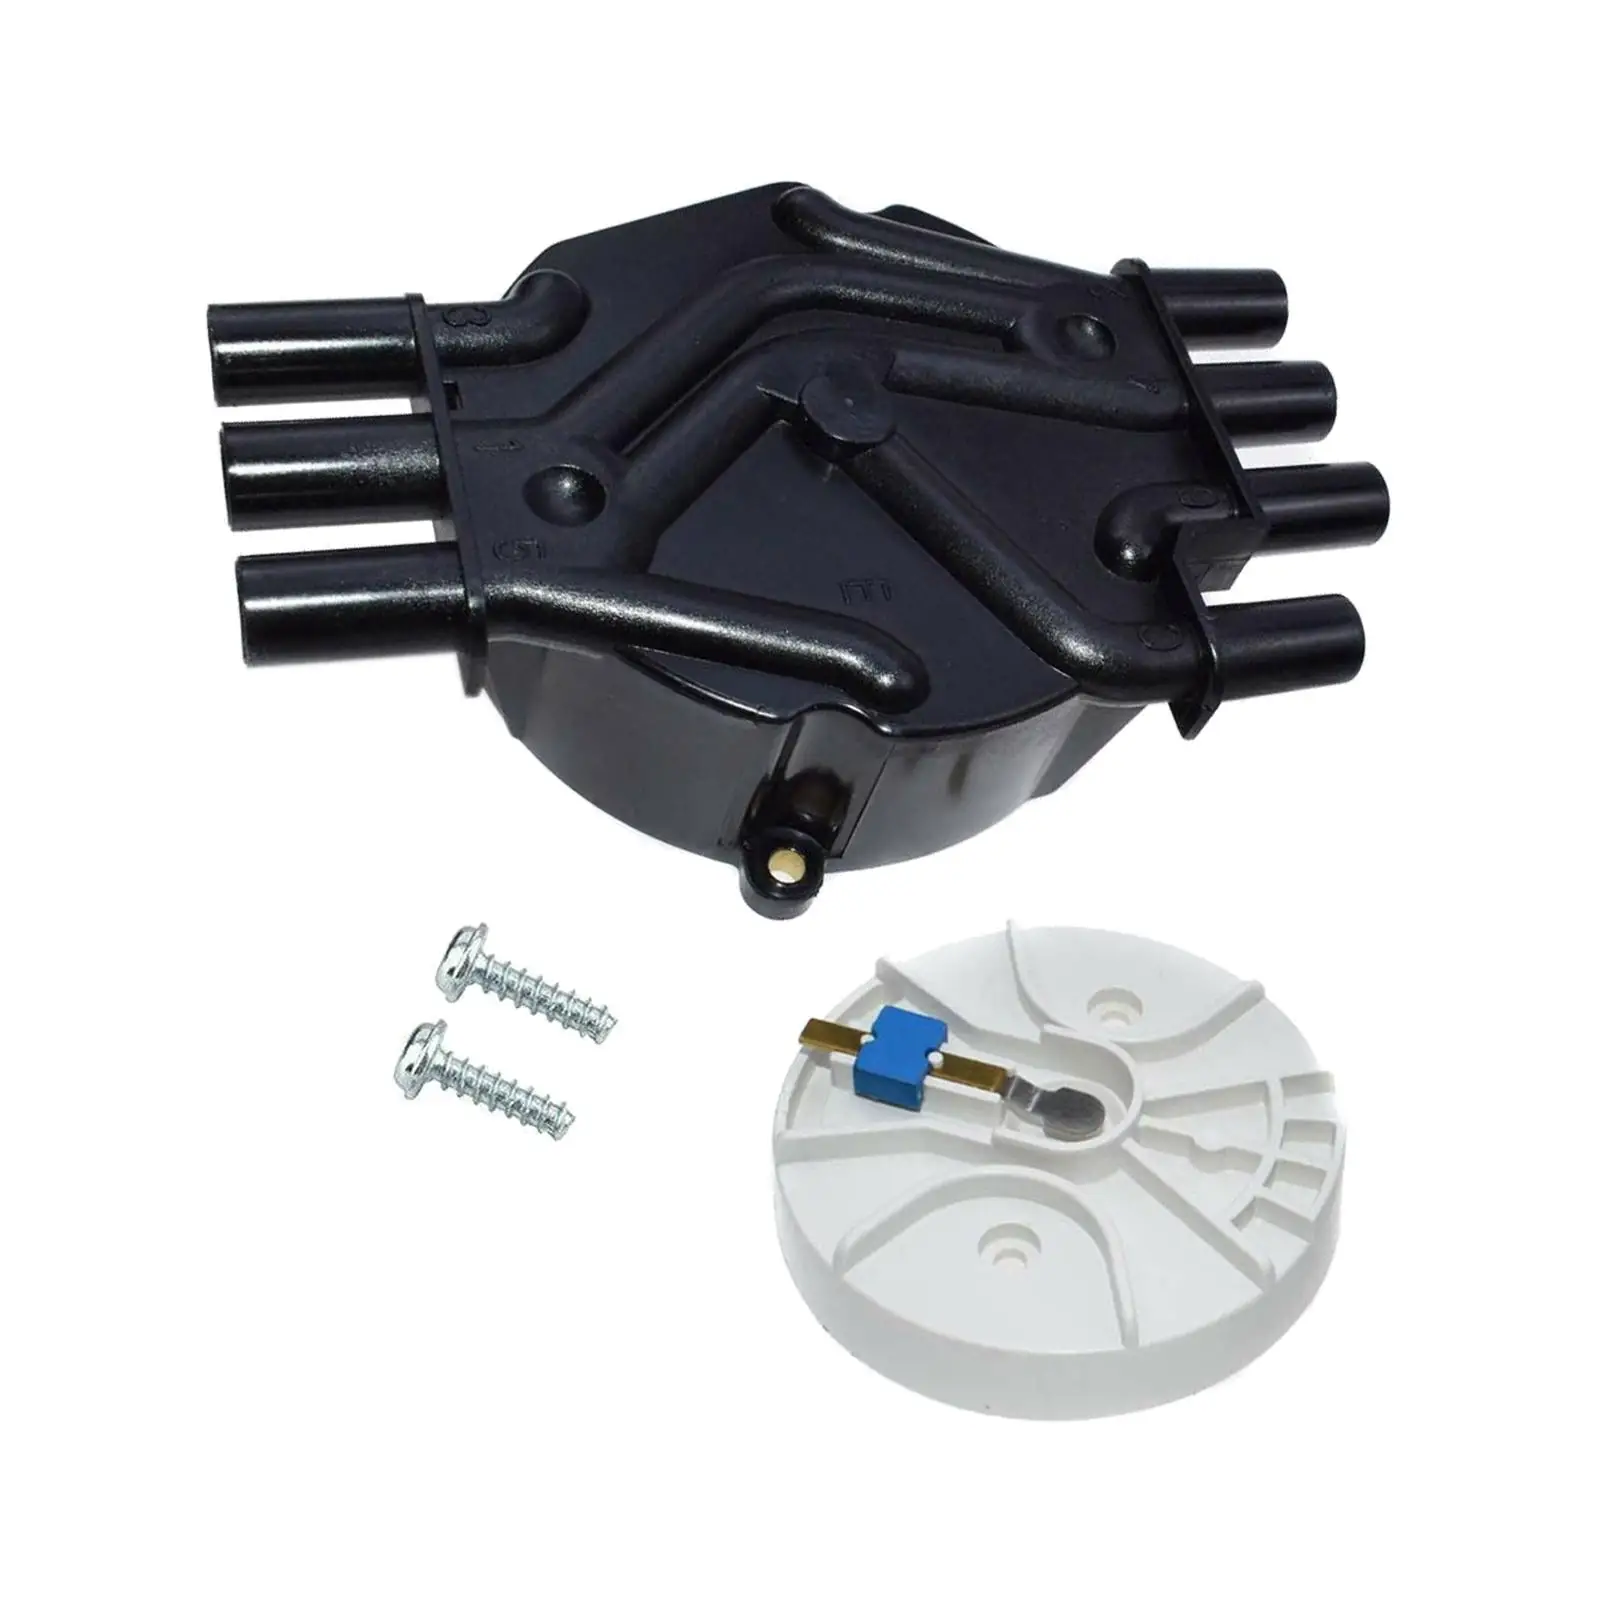 Distributor Cover Professional Easy to Install with Screw Rotor Ignition set for DR475 888731 8104935770 D321A auto modification